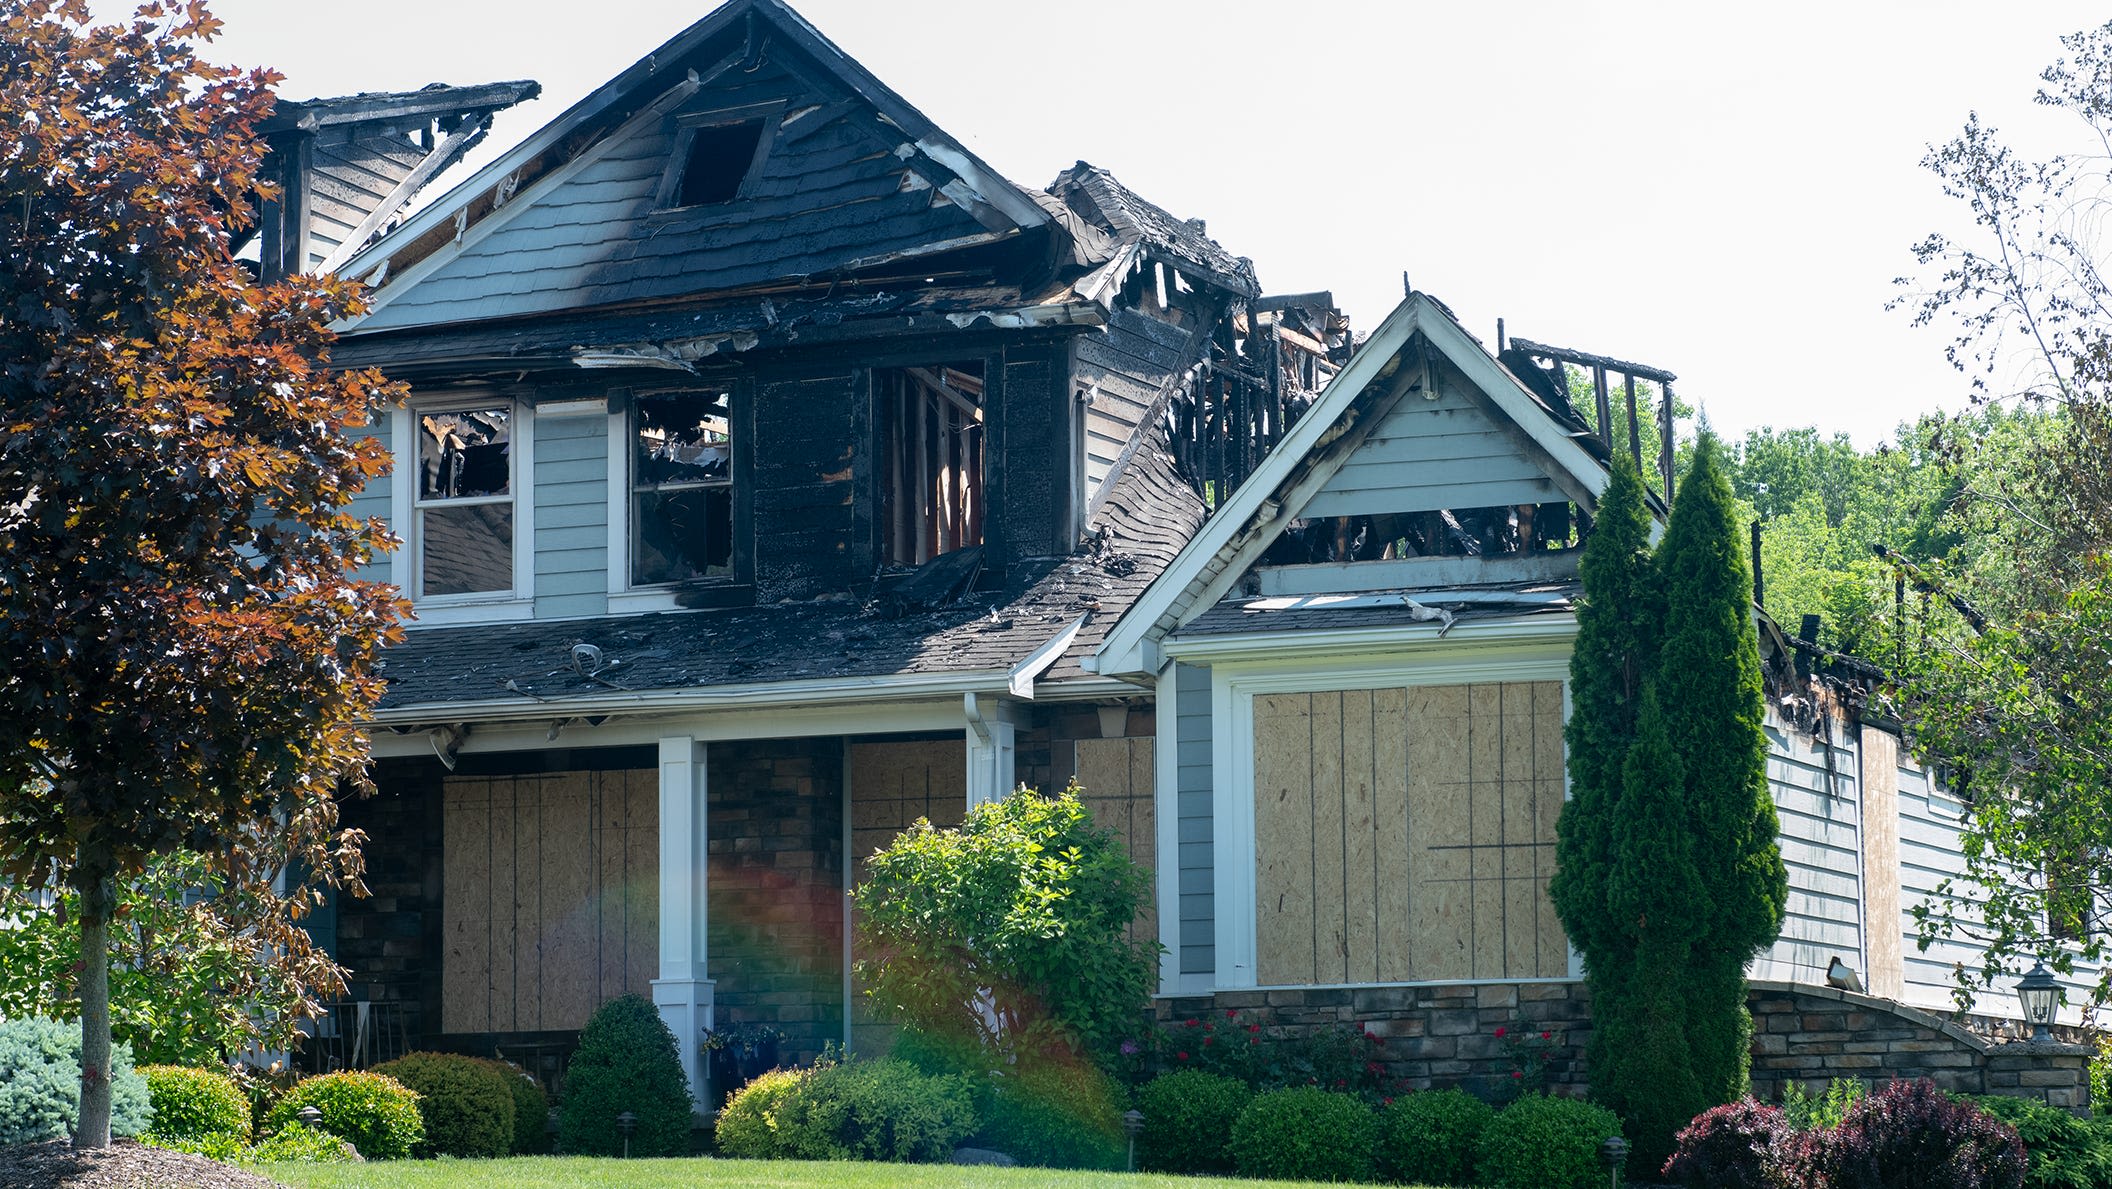 Grill possible cause of fire that destroys Bath home